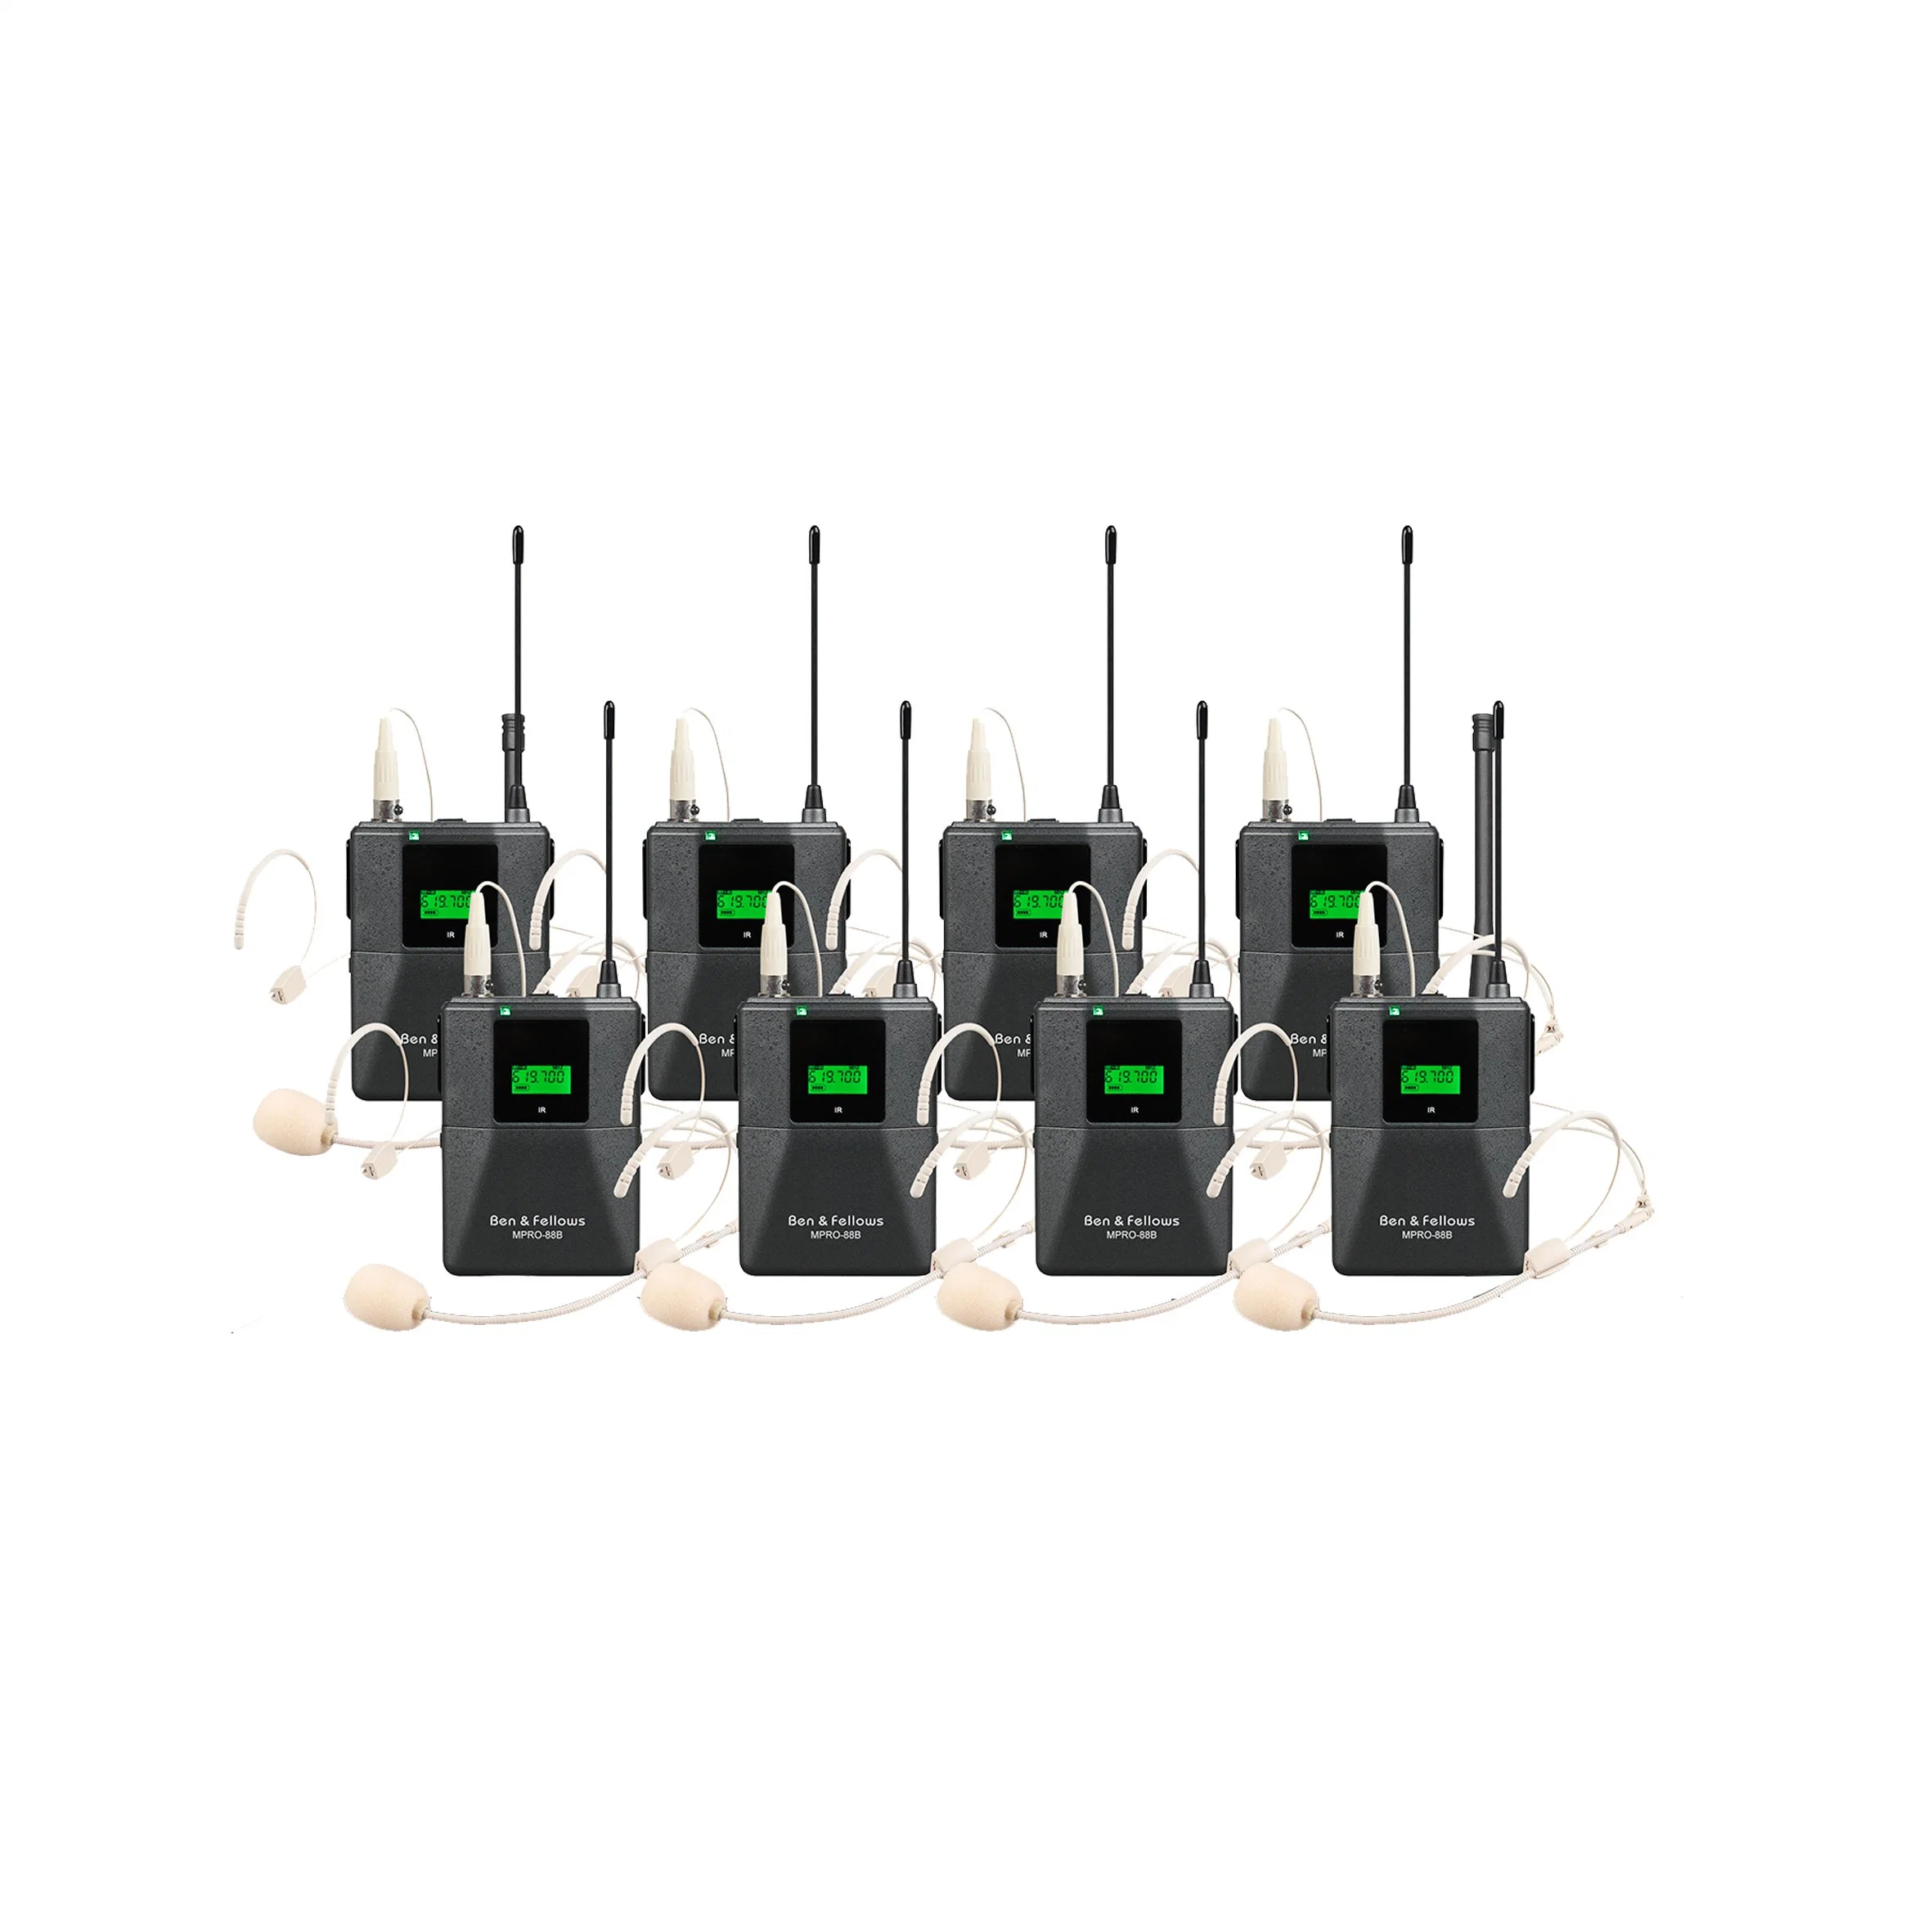 Professional 8 Channel Wireless UHF Headset Headphone Microphone with Belt-Pack